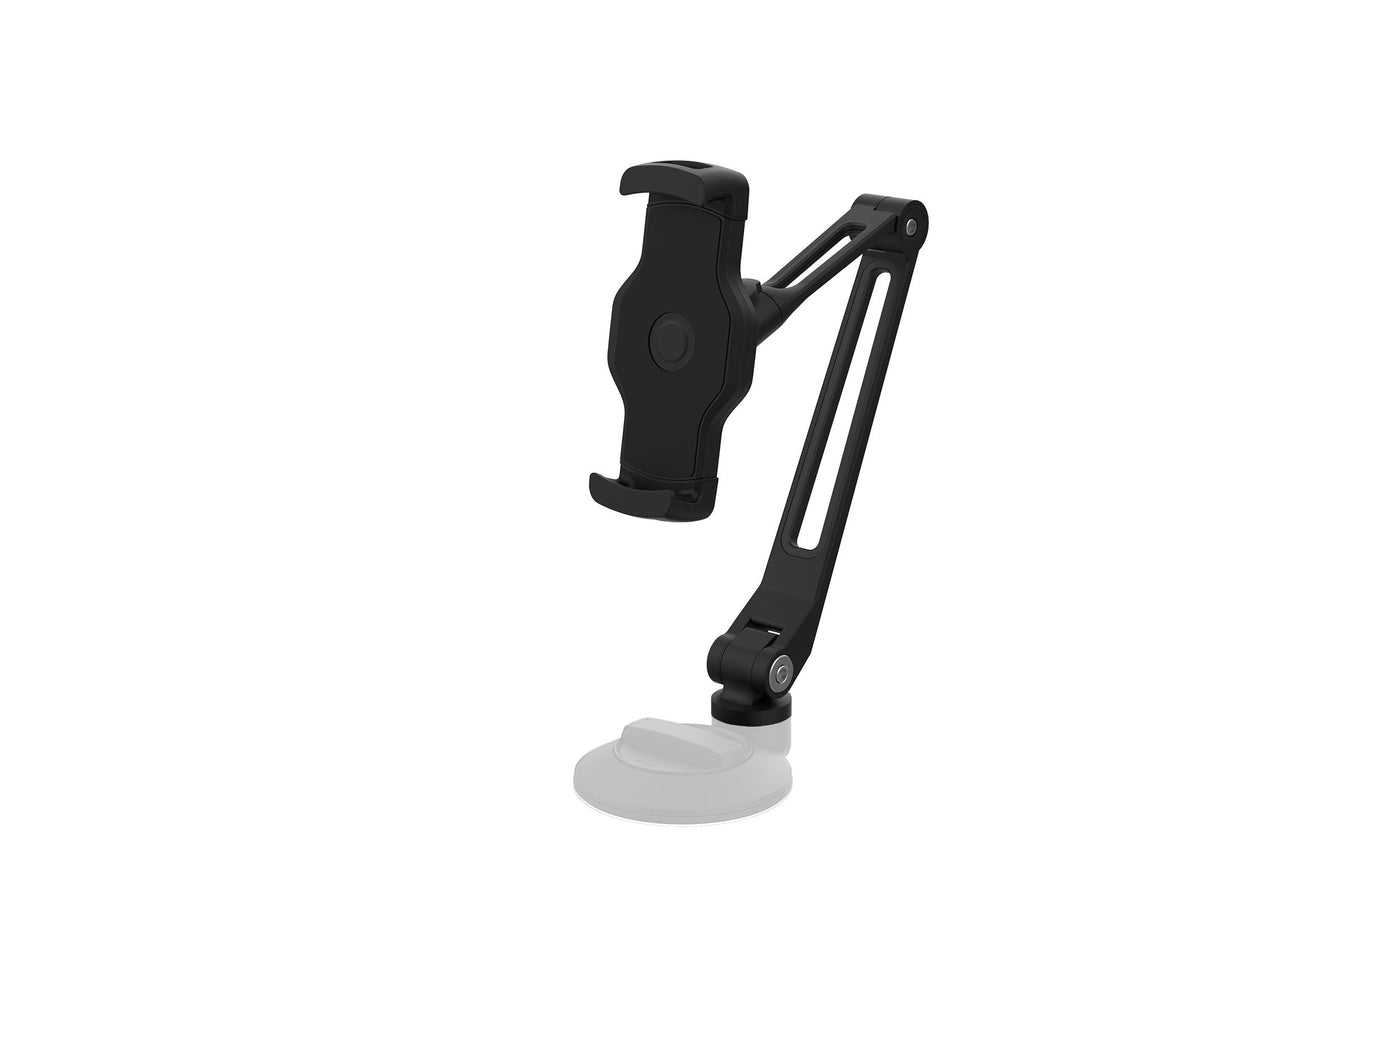 iRing Easy Lock Mount - Arm and Universal phone holder - Adjustable arm - Strong clamp - Rotatable - For Smartphone and Tablet